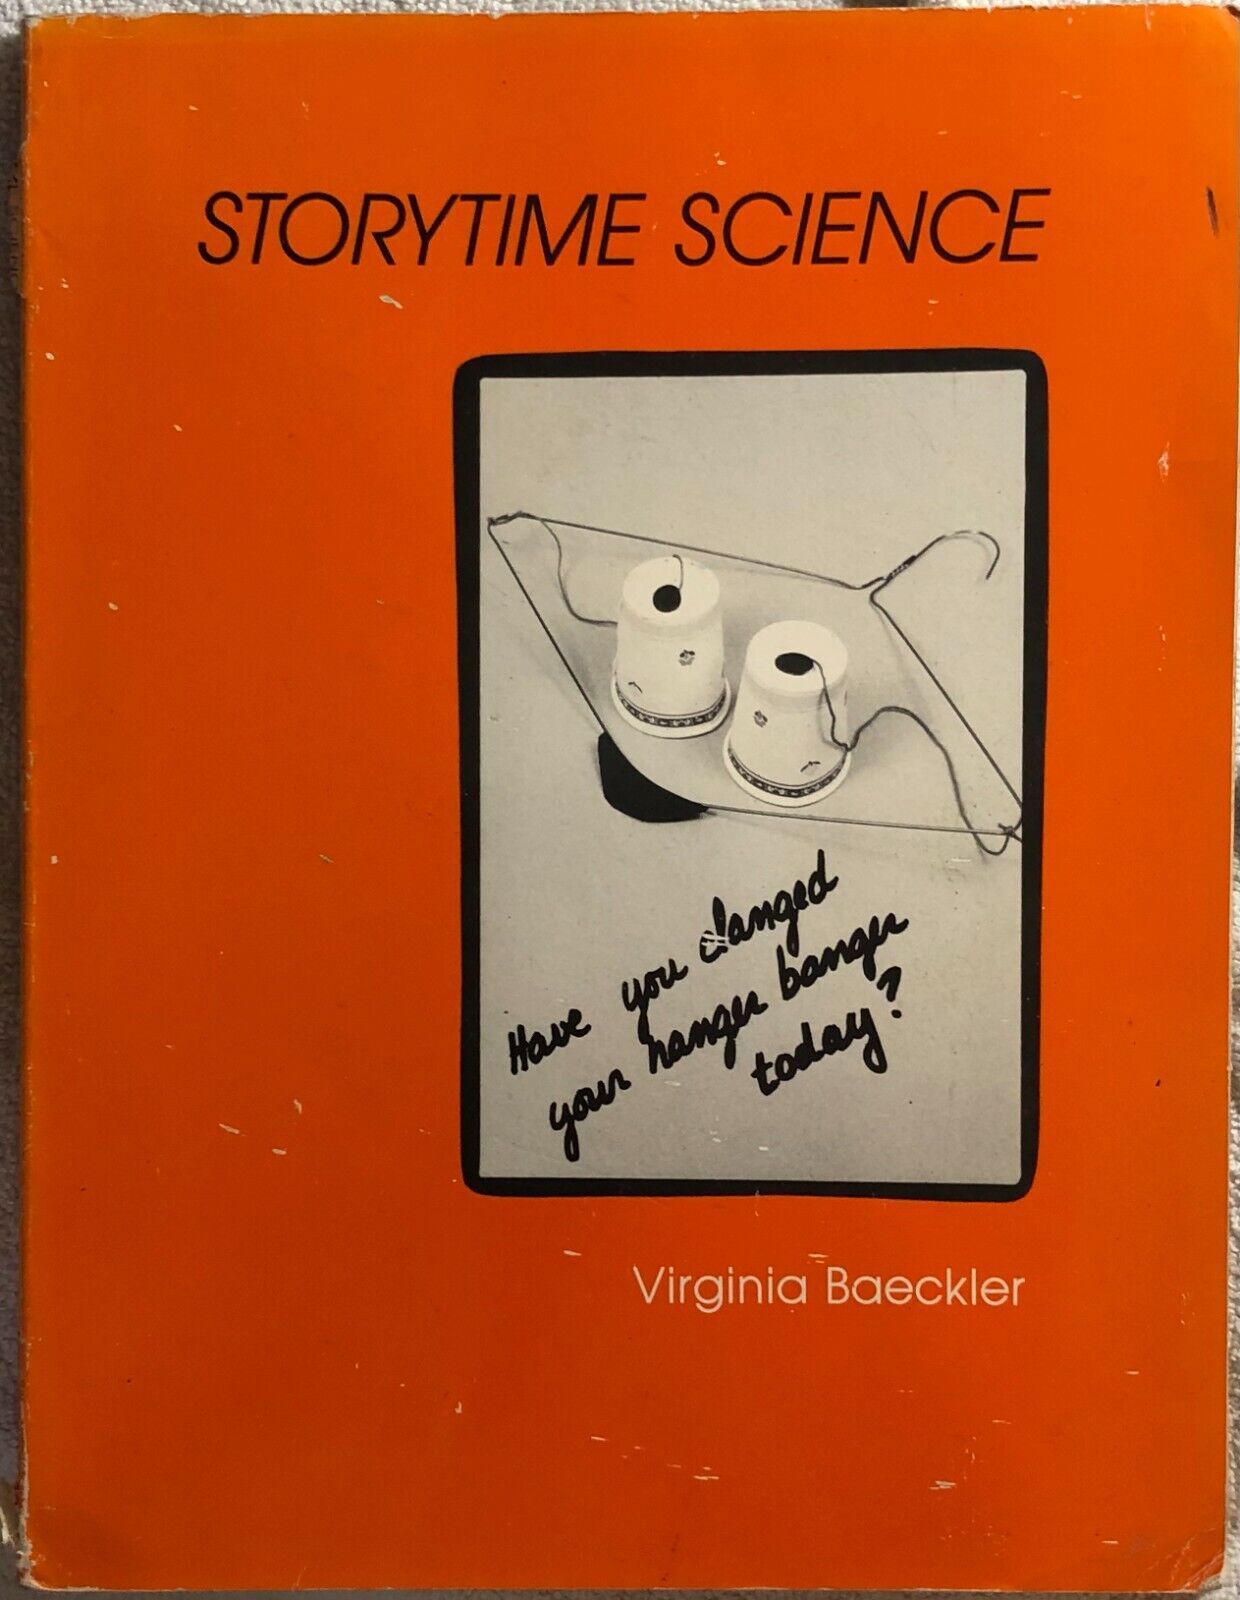 Storytime Science Have You Clanged Your Hanger Banger Today? di Virginia Baeckle